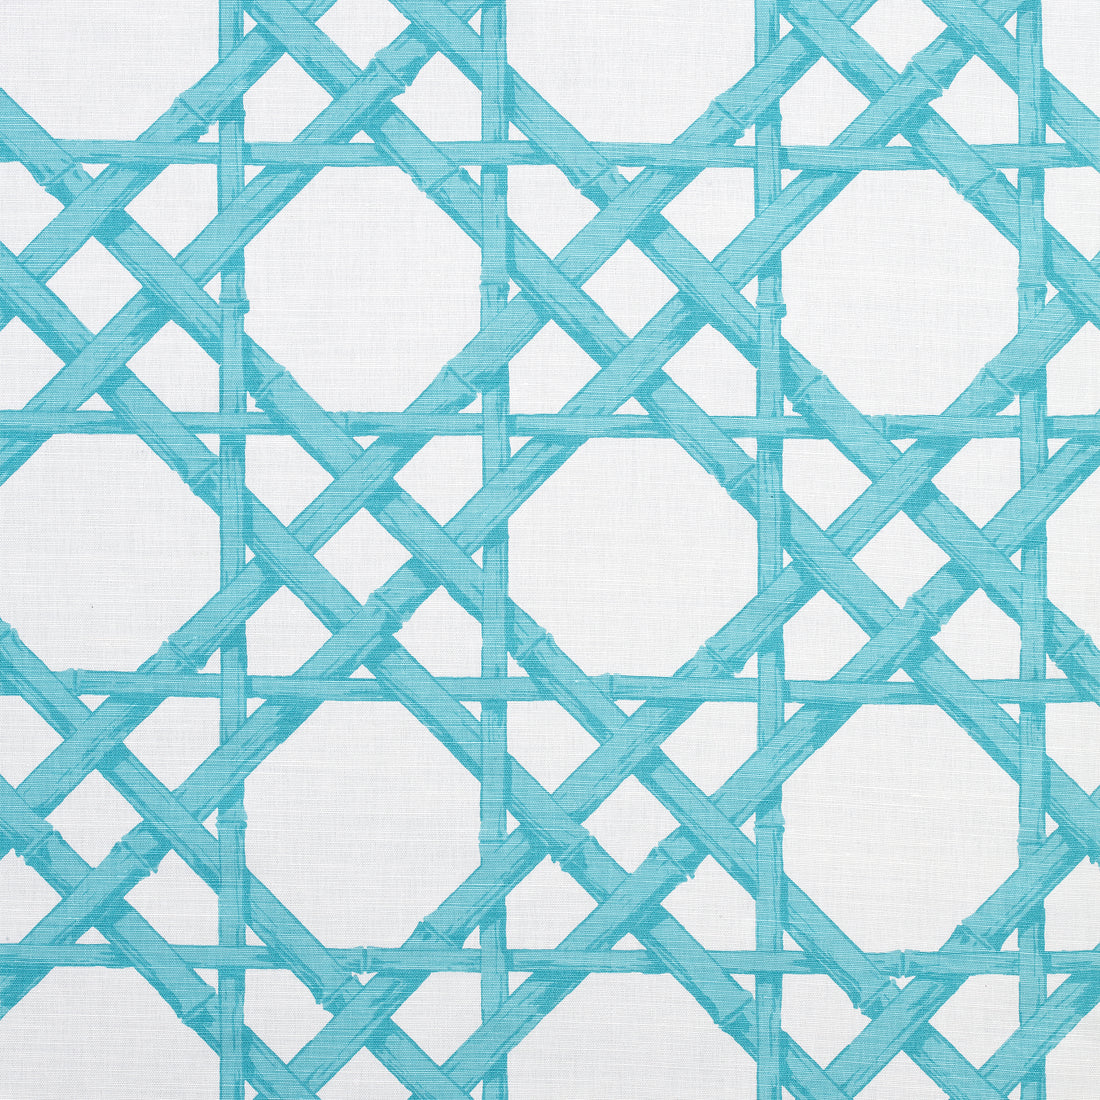 Cyrus Cane fabric in turquoise color - pattern number F913143 - by Thibaut in the Summer House collection